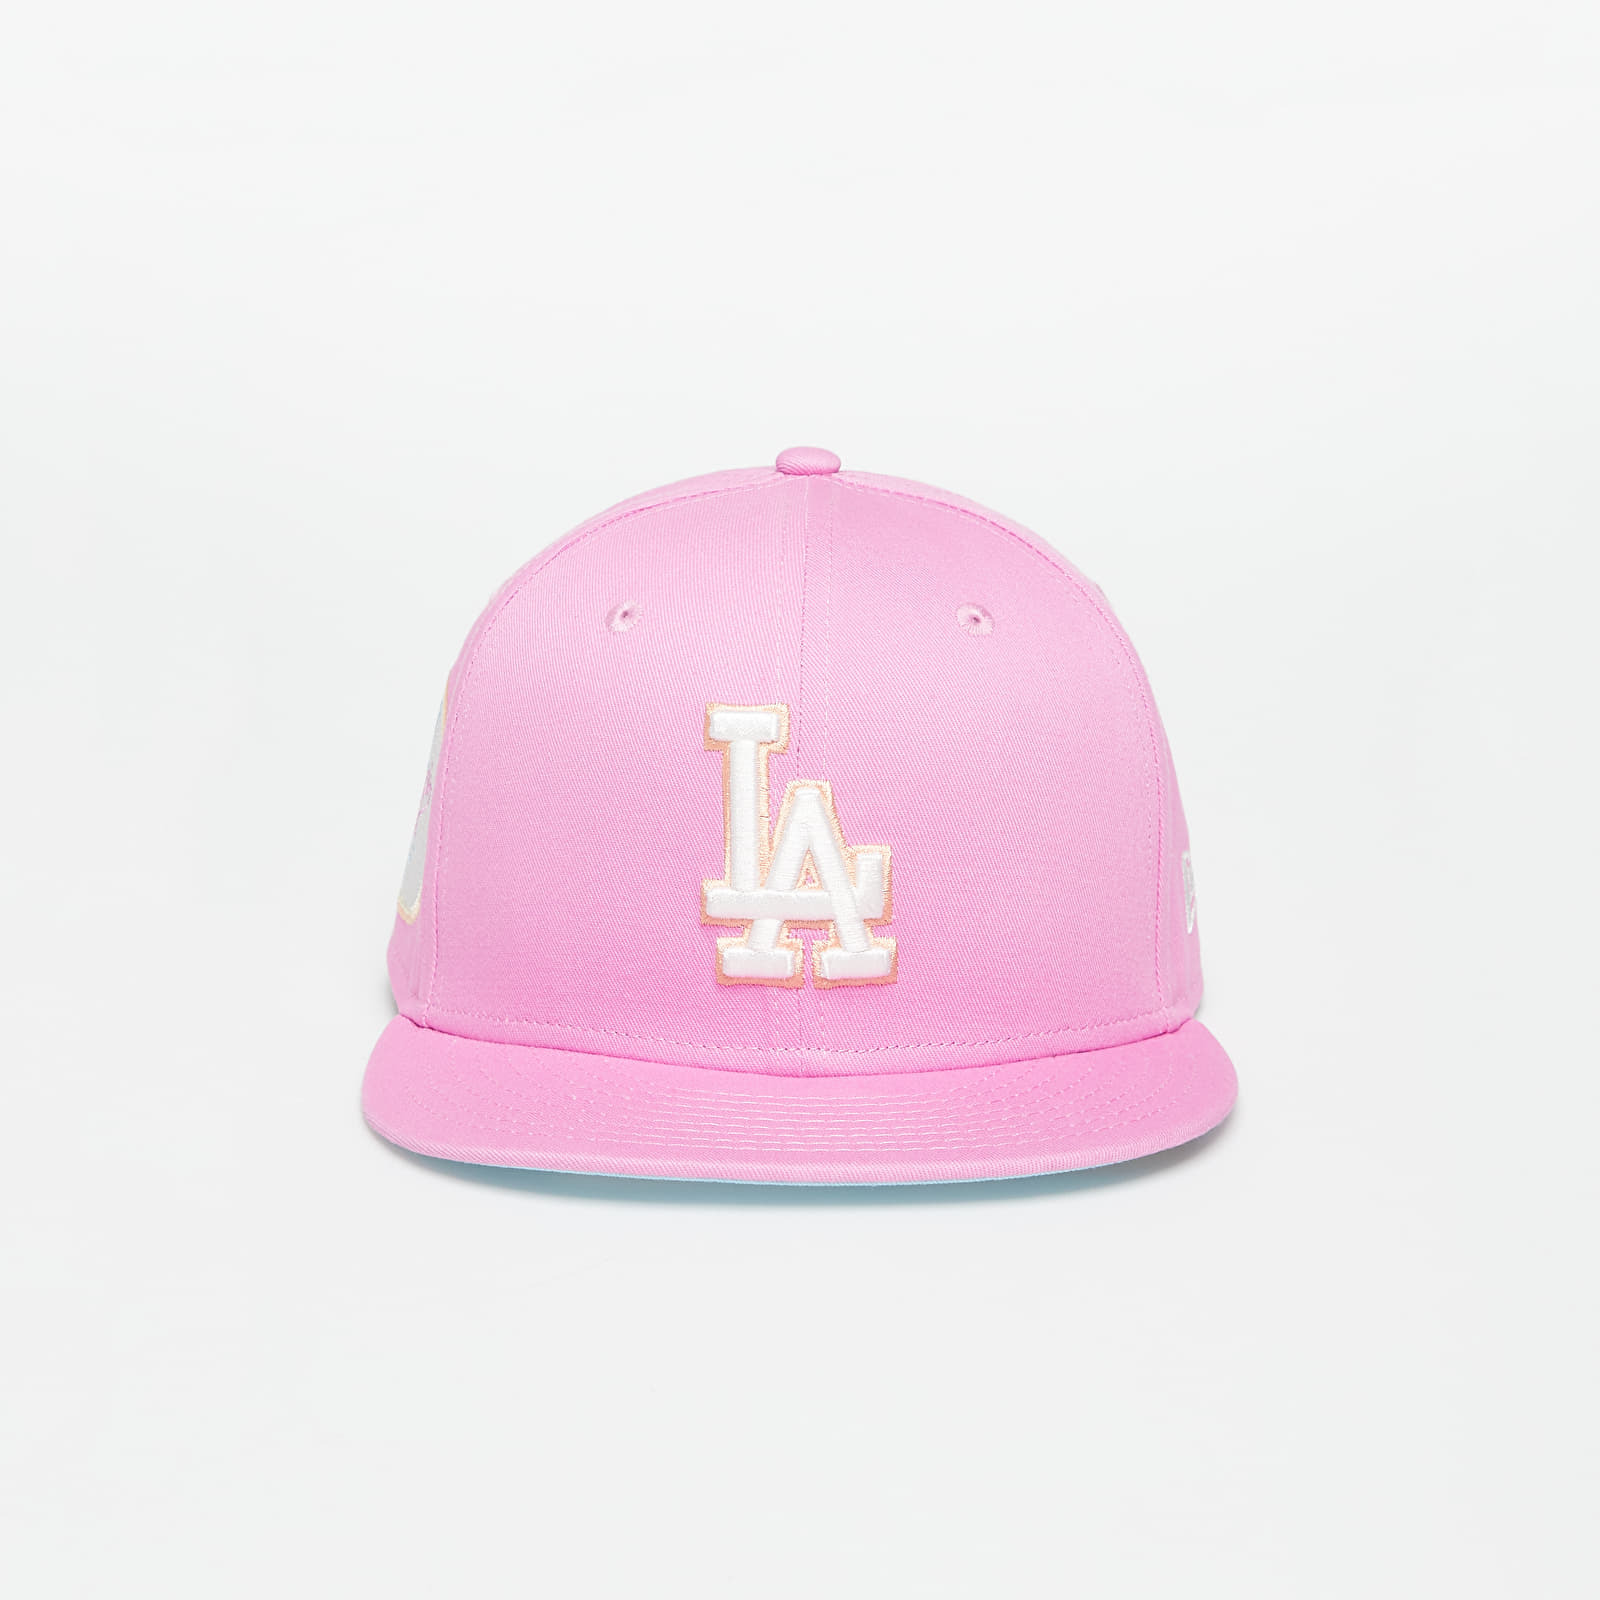 New Era - los angeles dodgers pastel patch 9fifty snapback cap wild rose/ off white